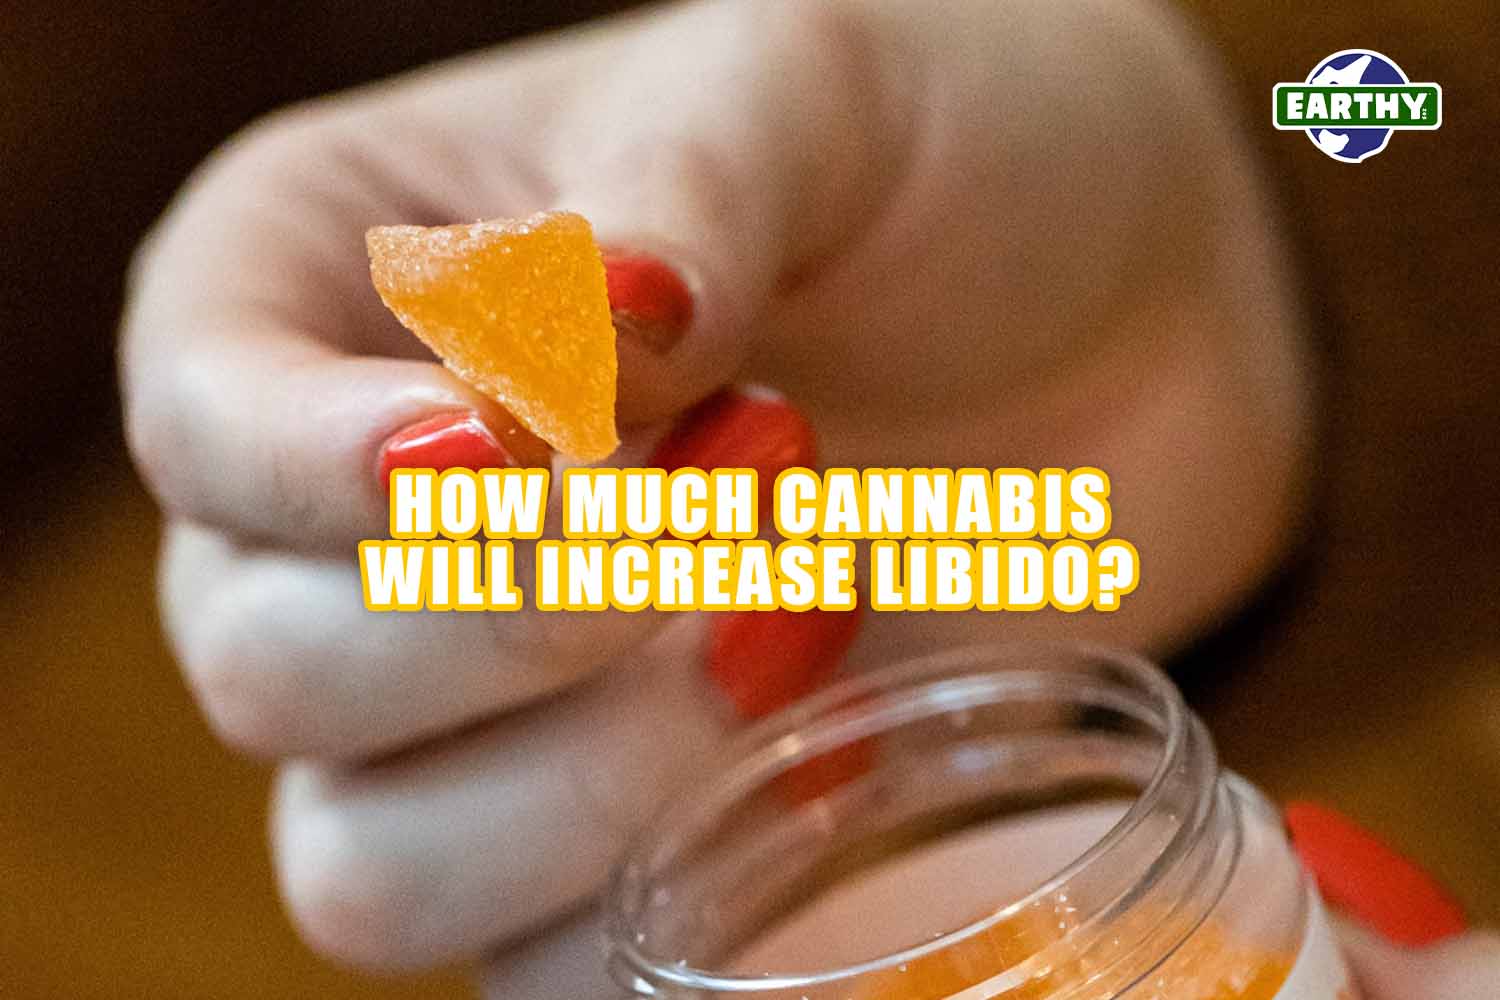 How much cannabis will increase libido? Earthy Now